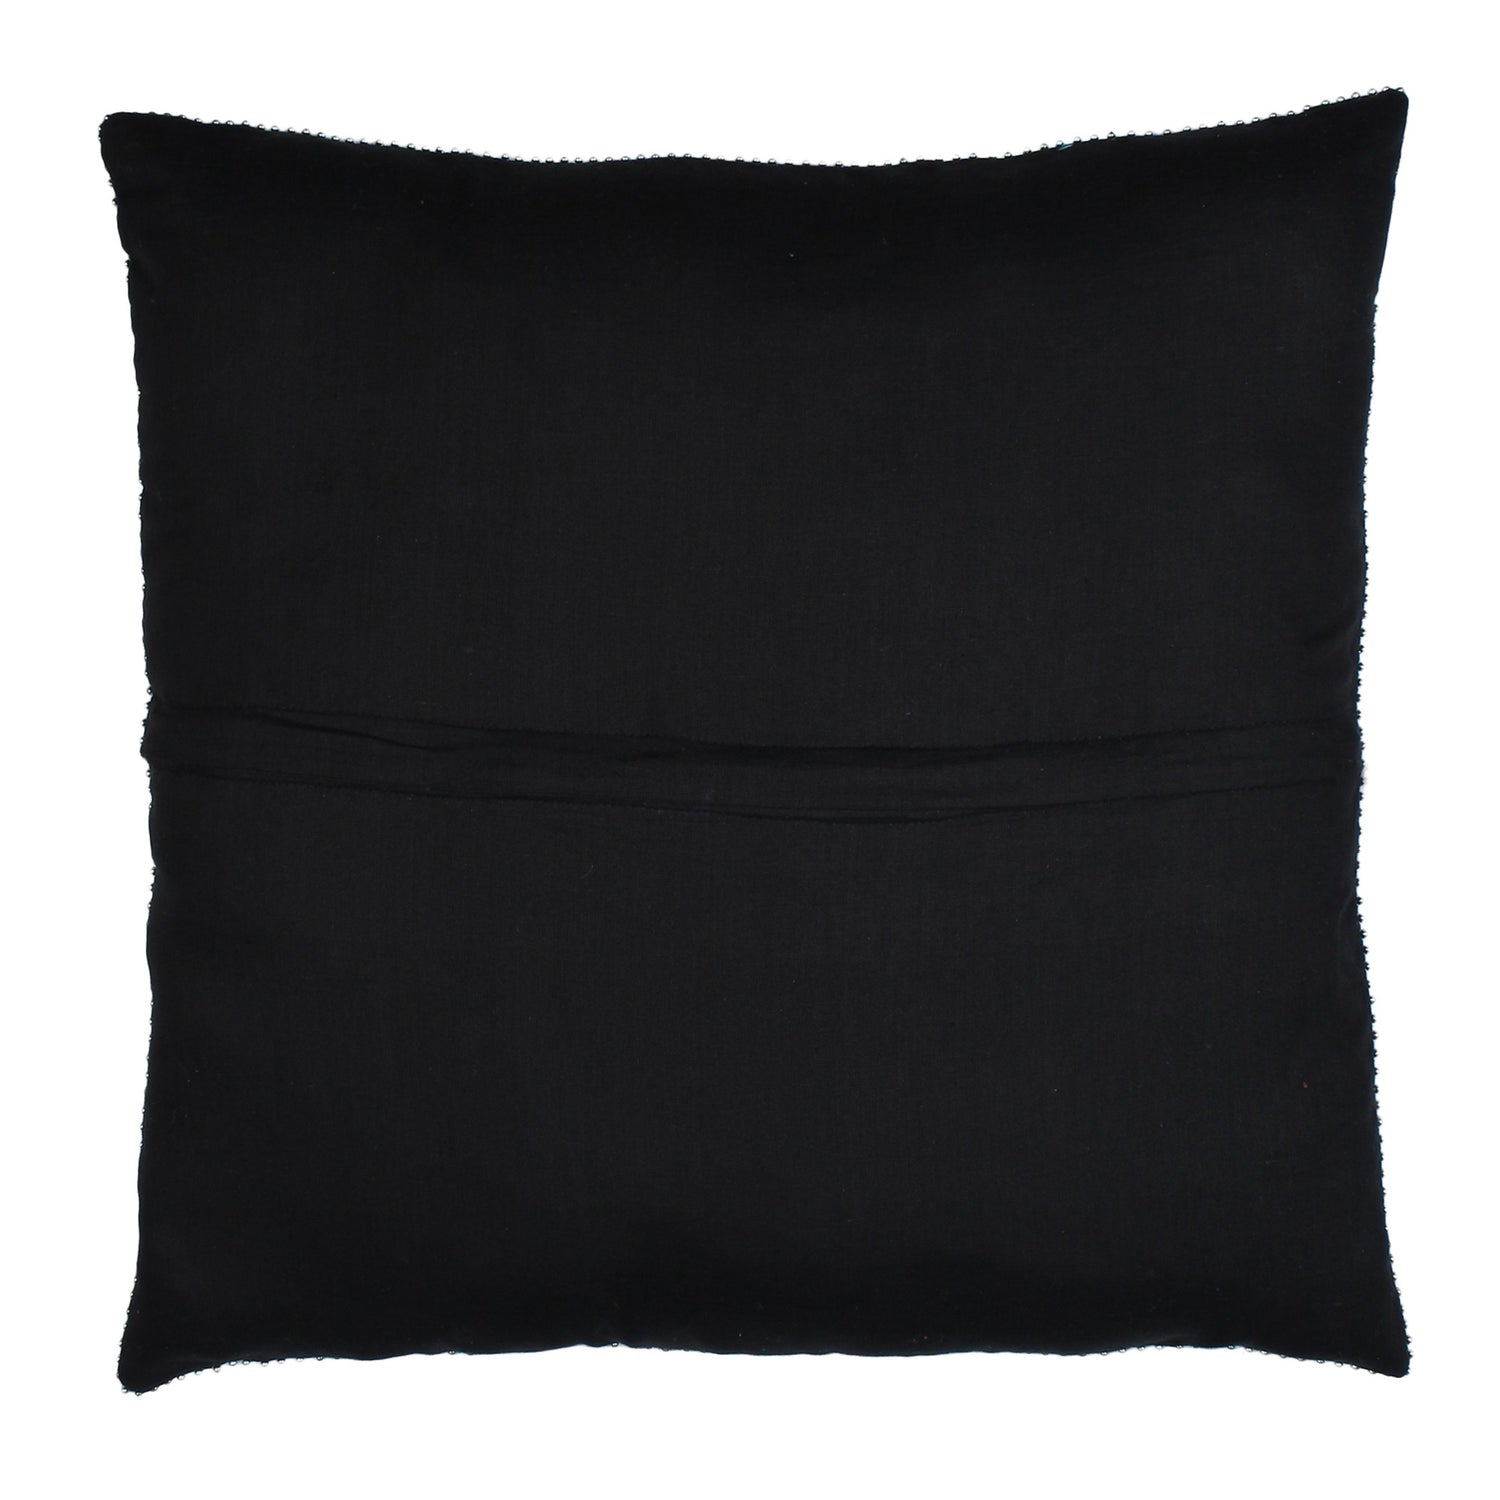 black cushion cover online india 